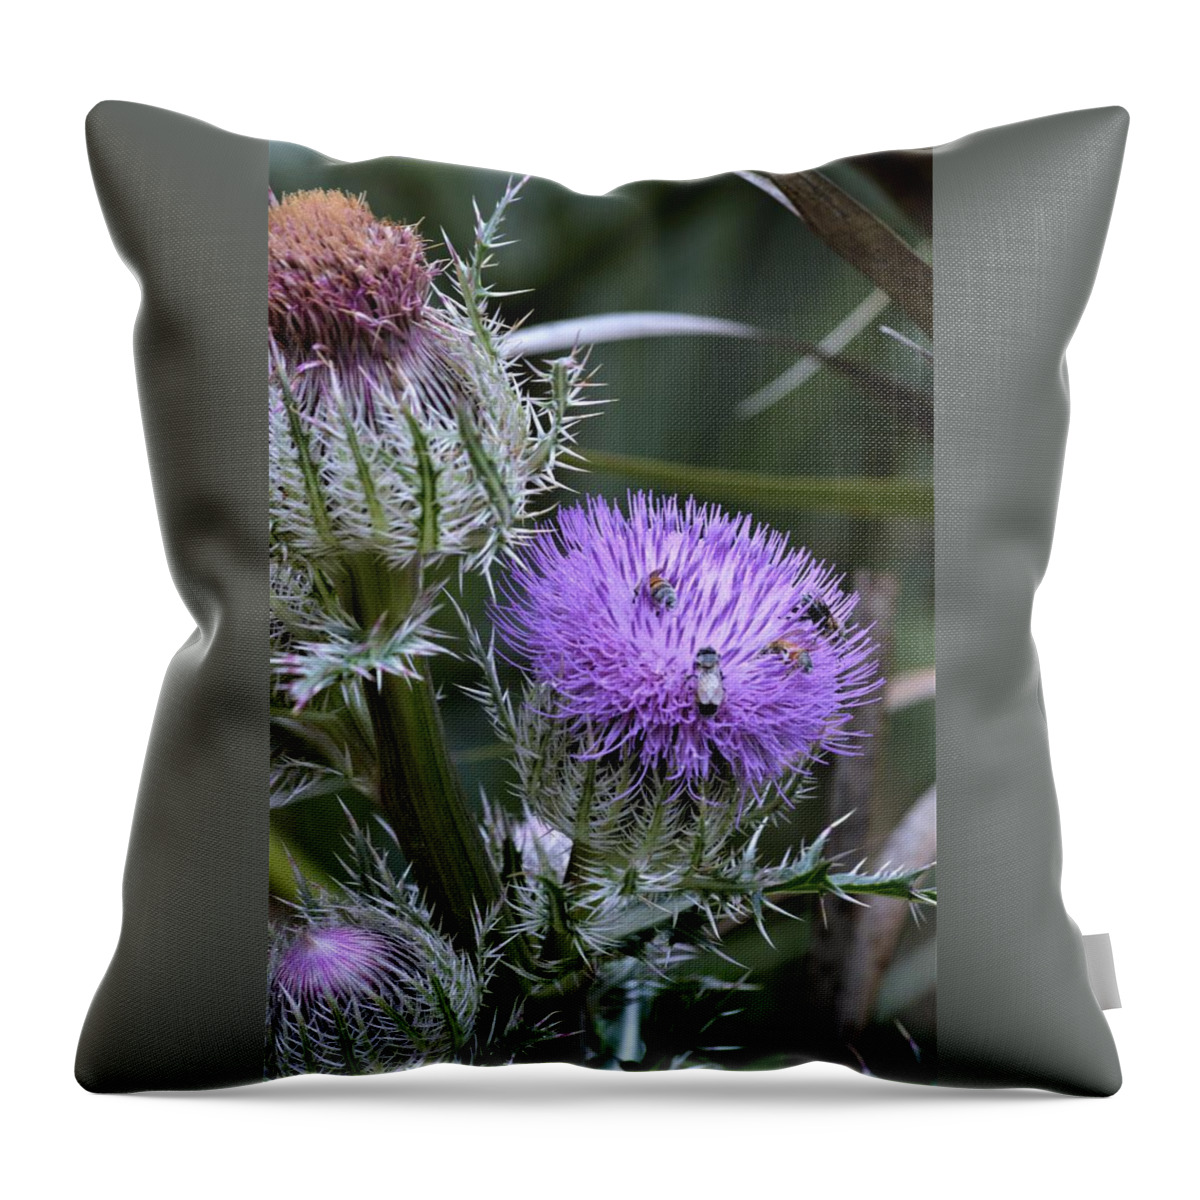 Meeting Place Throw Pillow featuring the photograph Meeting Place by Warren Thompson